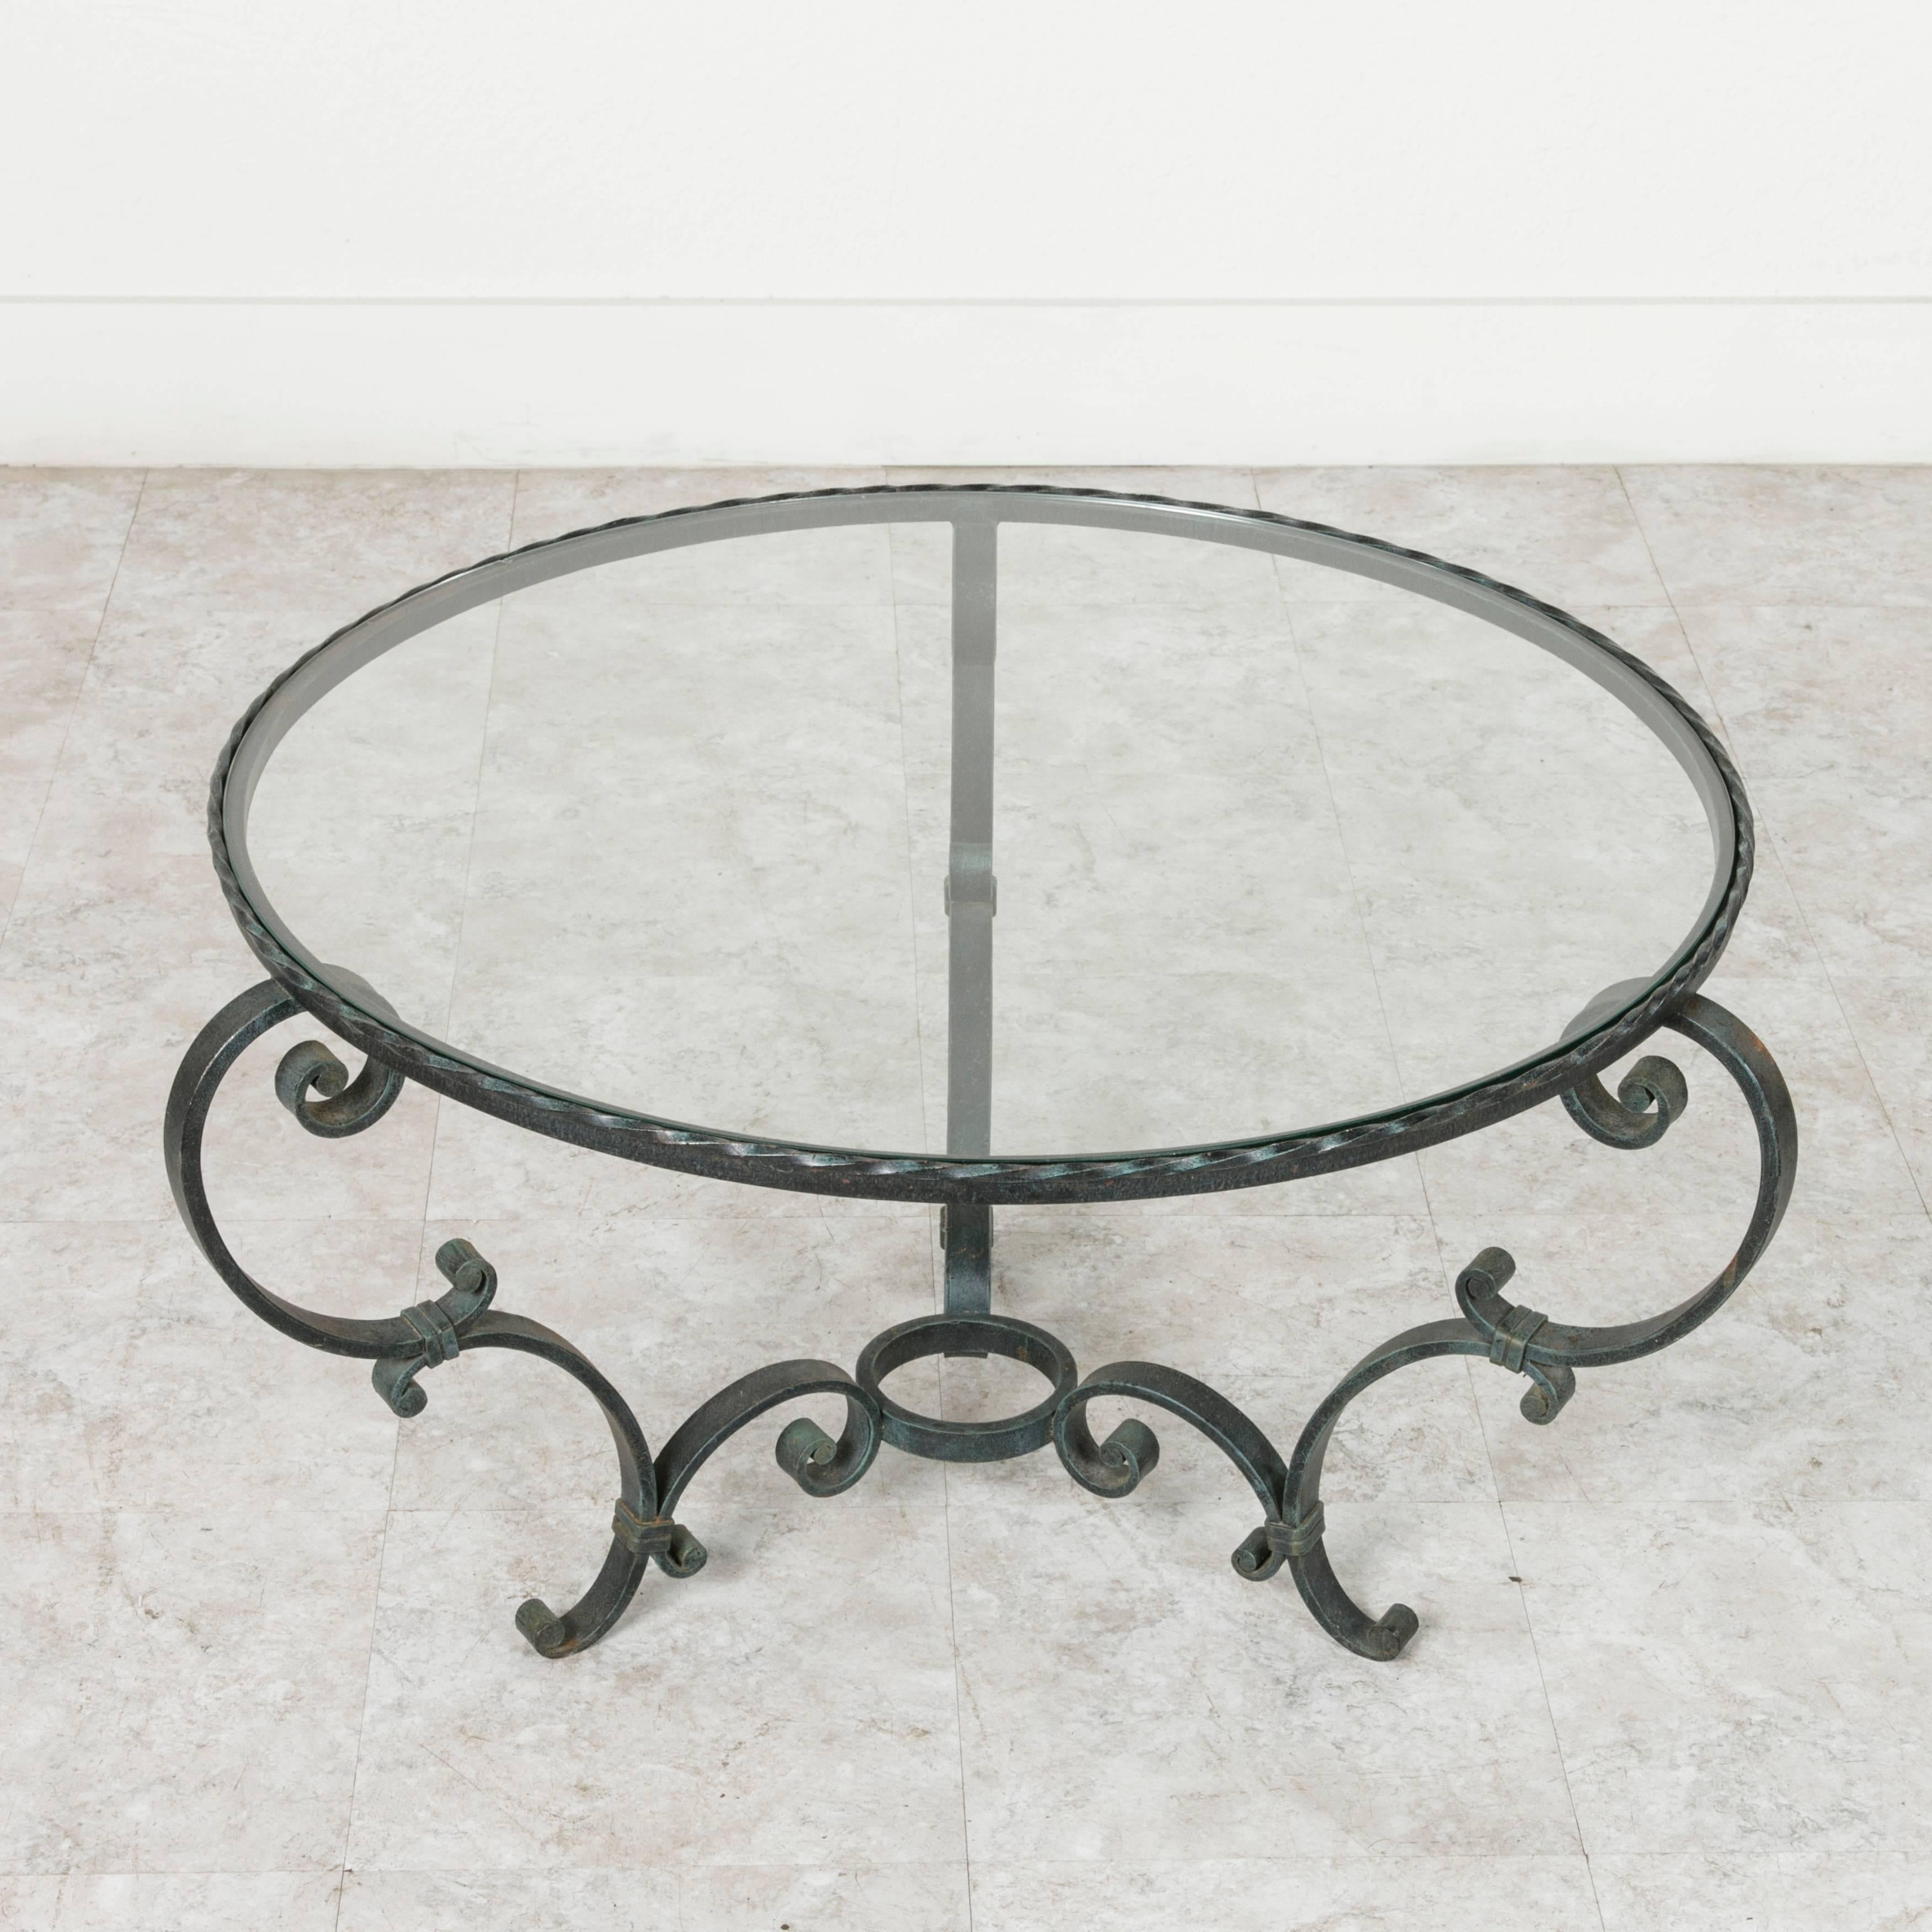 This glass topped round wrought iron coffee table was made by hand in France in the early 20th century. The circular top is nearly three feet in diameter, making it an excellent scale for most seating areas. The airy curves of this piece are both